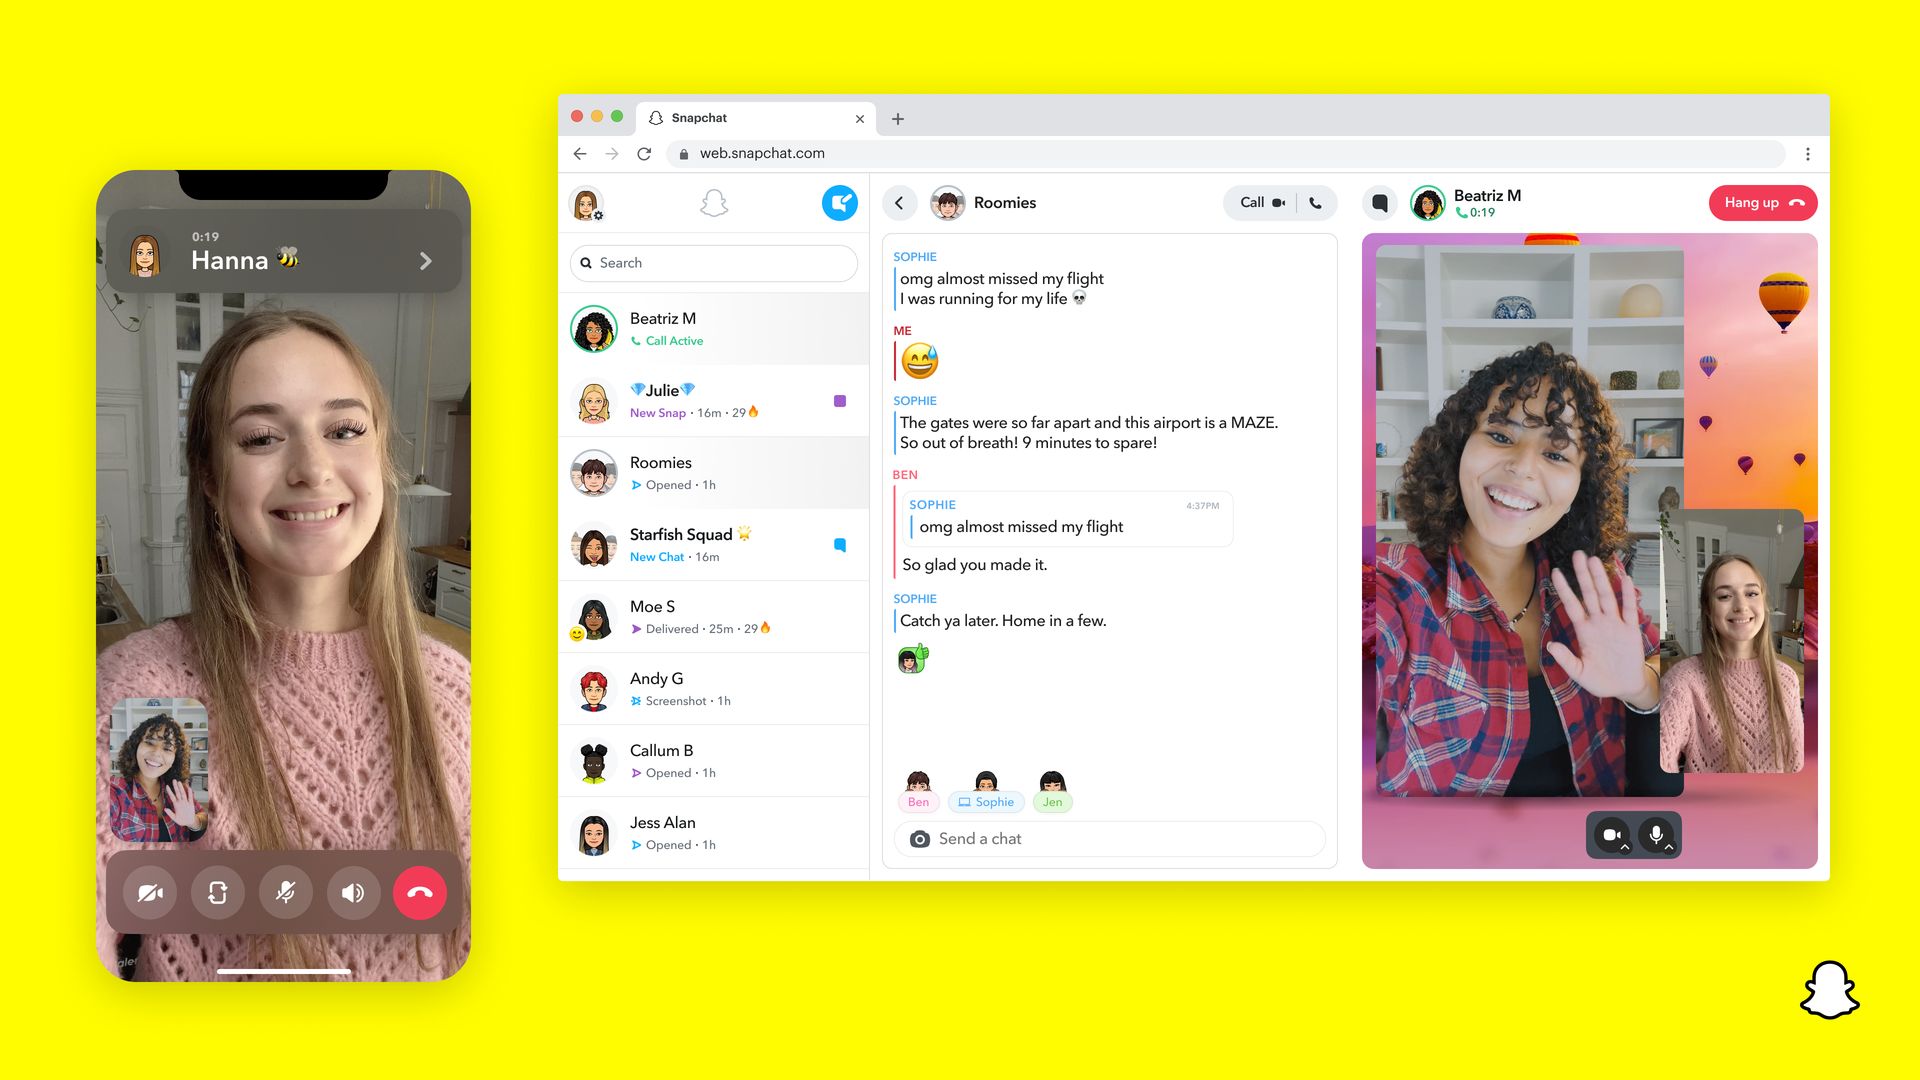 With the release of Snapchat Web, the platform is expanding its platform beyond smartphones for the first time, bringing capabilities like snapping, messaging, and video calling to desktop computers.